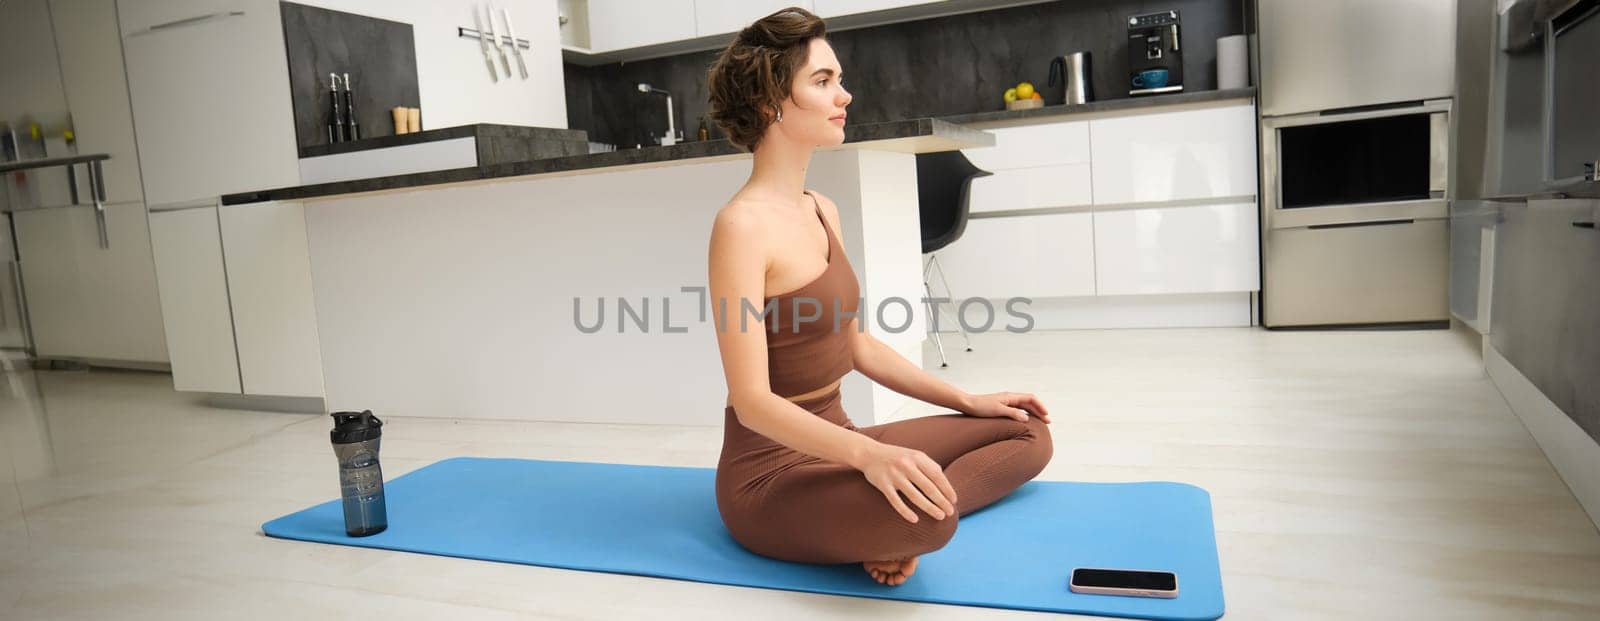 Fit healthy young woman doing pilates yoga exercise fitness training workout at home interior standing in warrior pose. Physical activity for body and mind relaxation, healthy lifestyle concept.